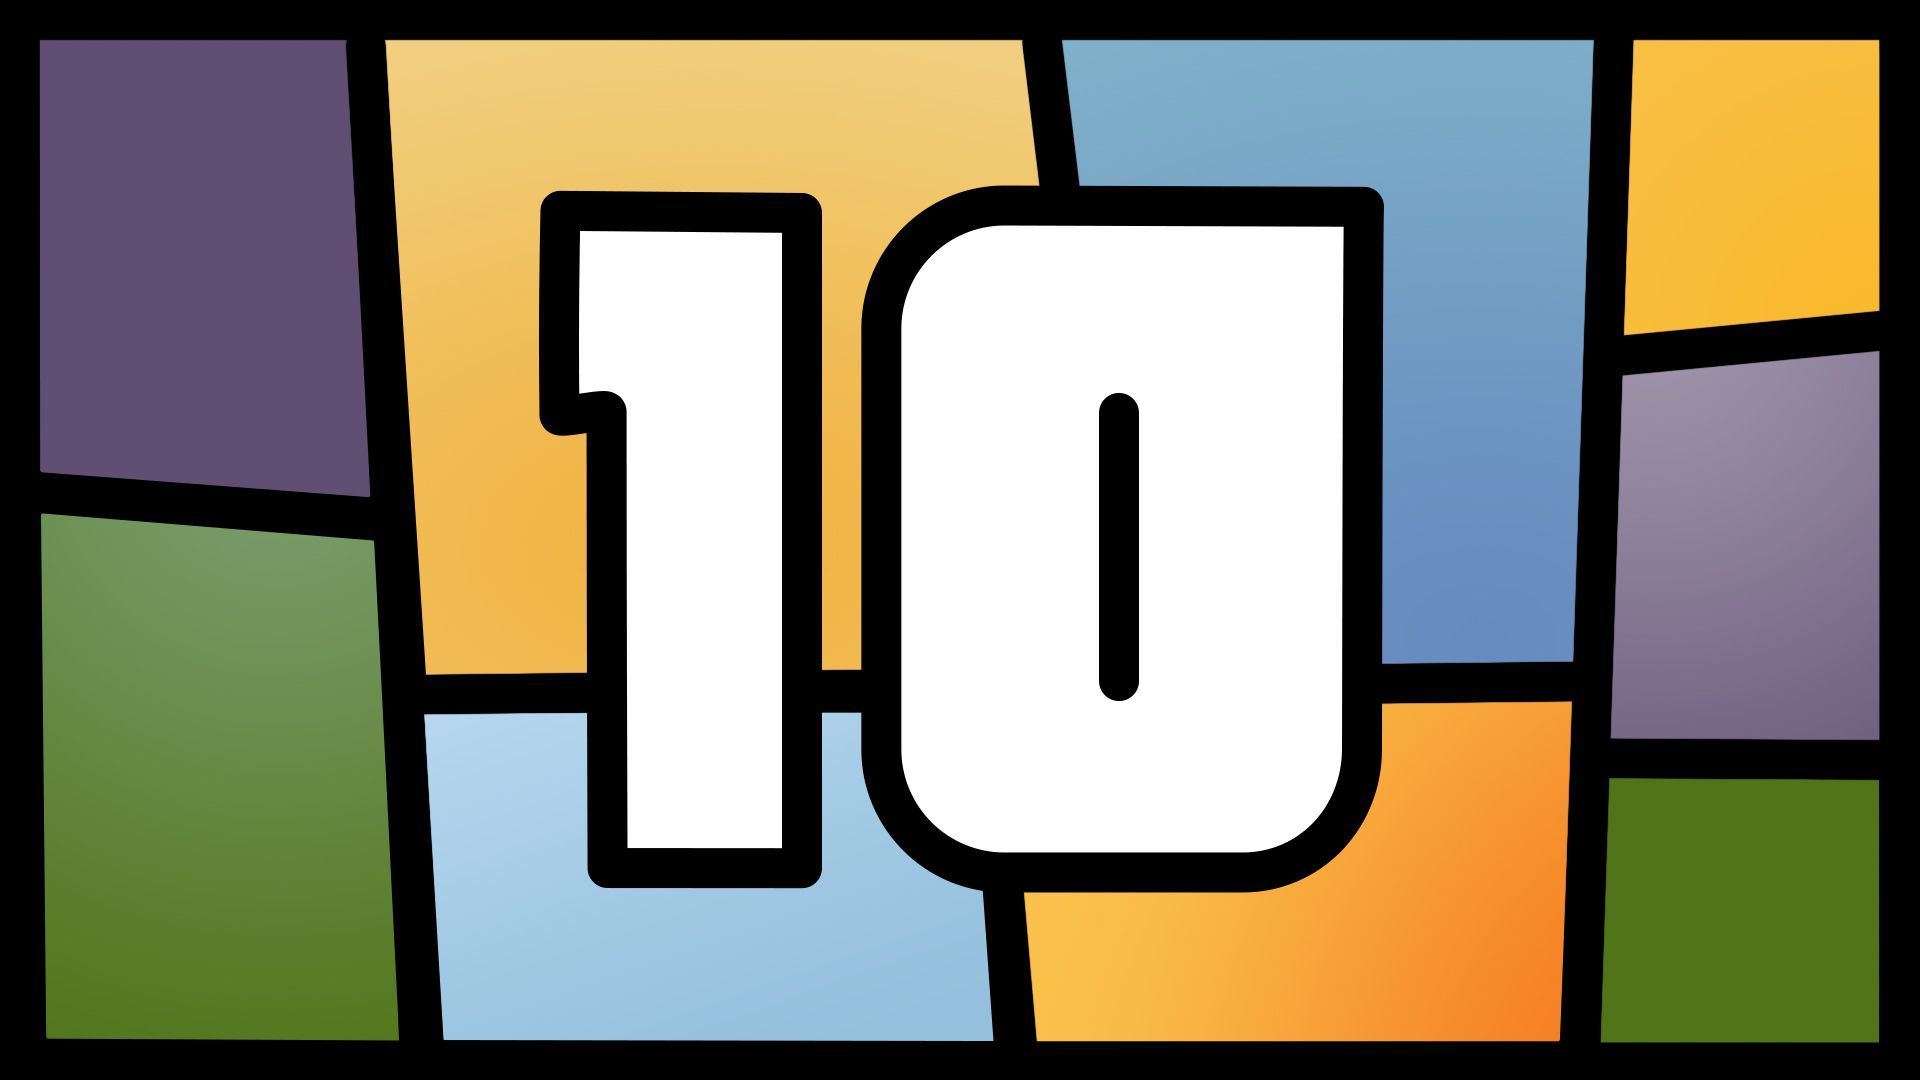 Illustration of an abstracted version of the Grand Theft Auto Five game cover art with the number 10 in the logo font.